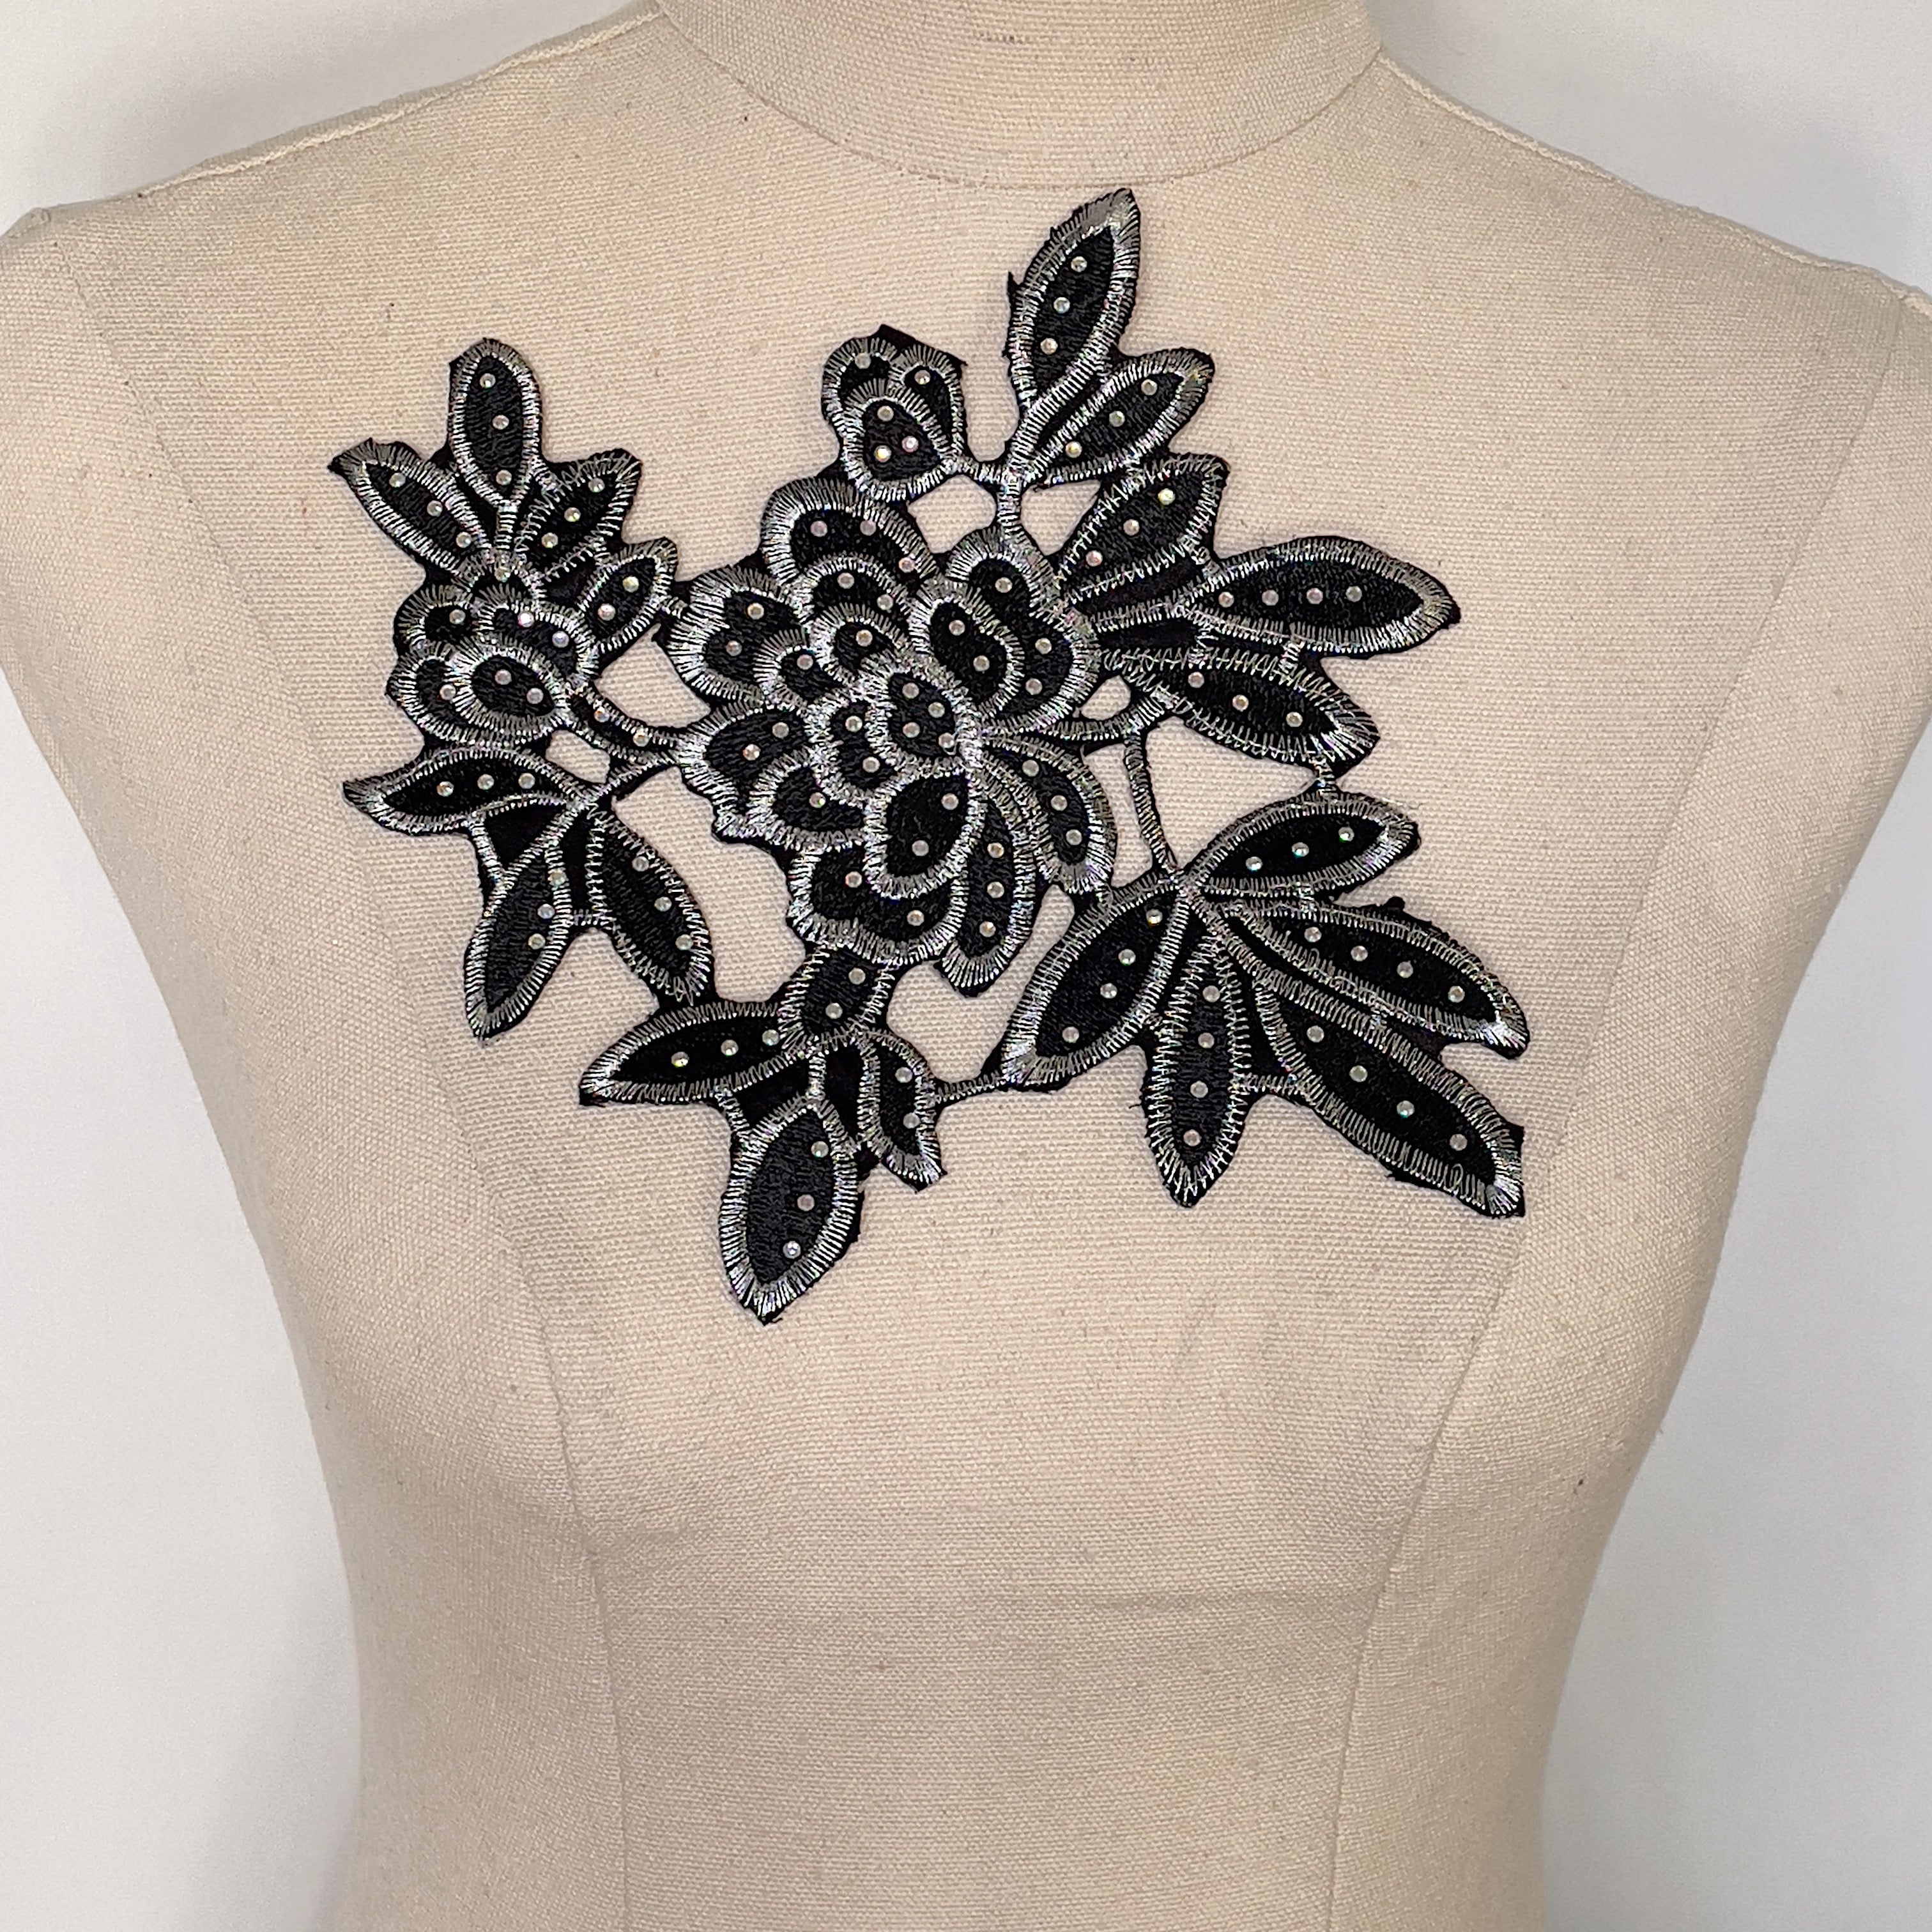 A silver and black applique with a large central flowers surrounded by clusters of leaves. 